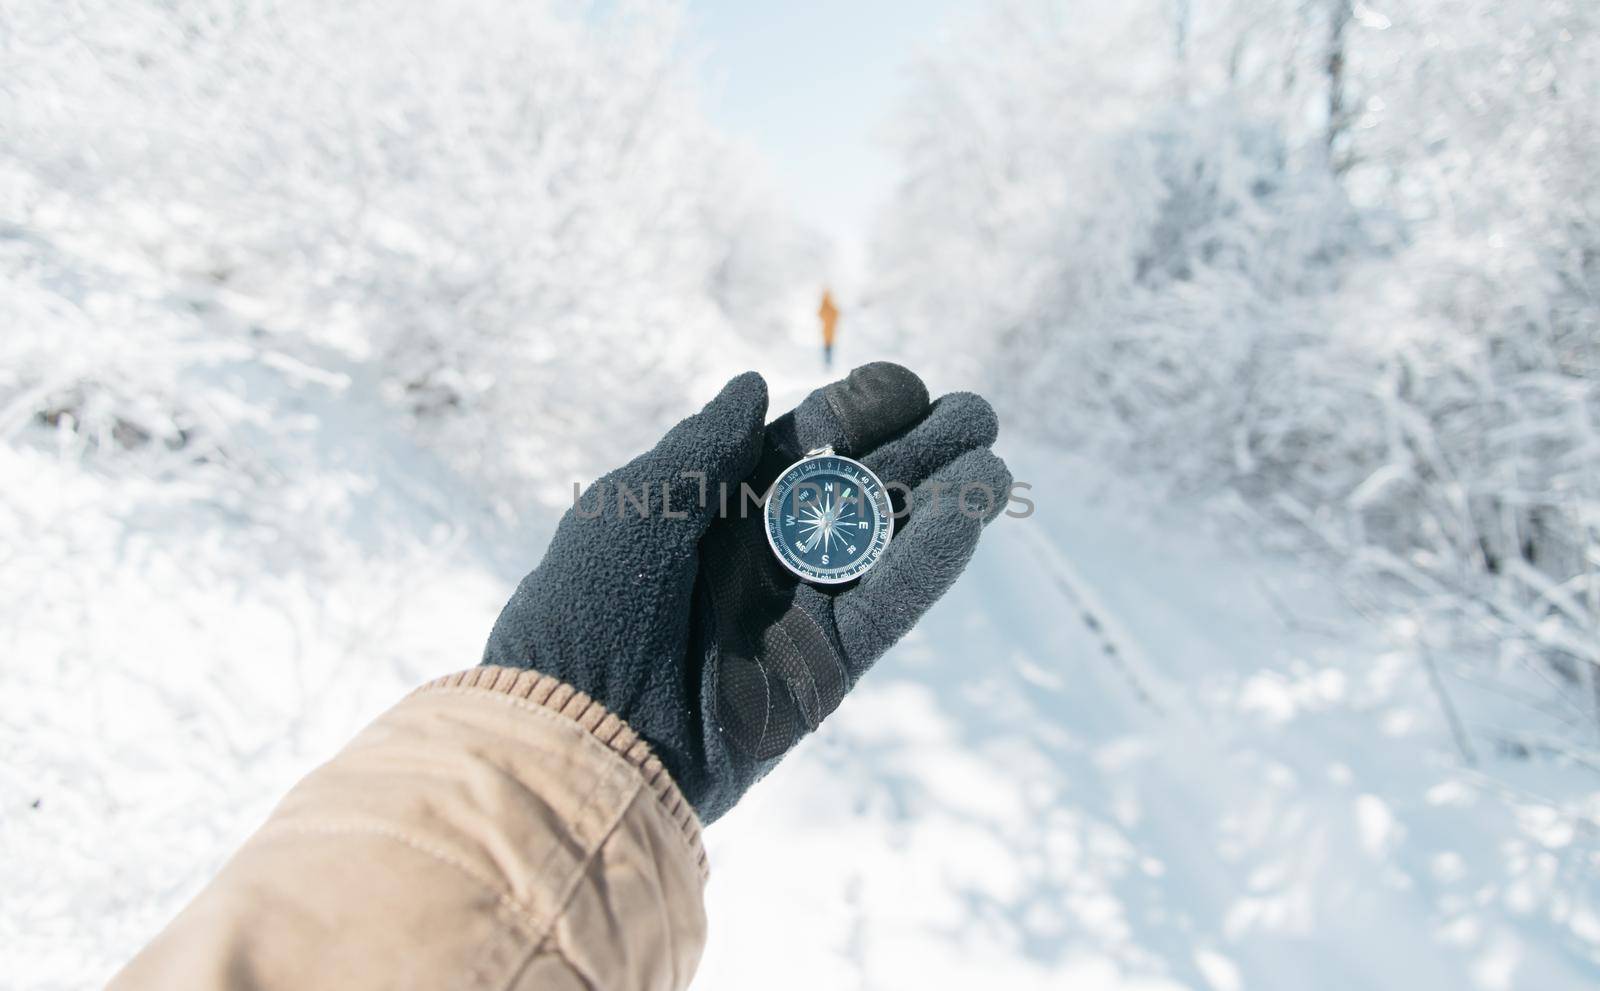 Man searching direction with compass in winter snowy forest, point of view.